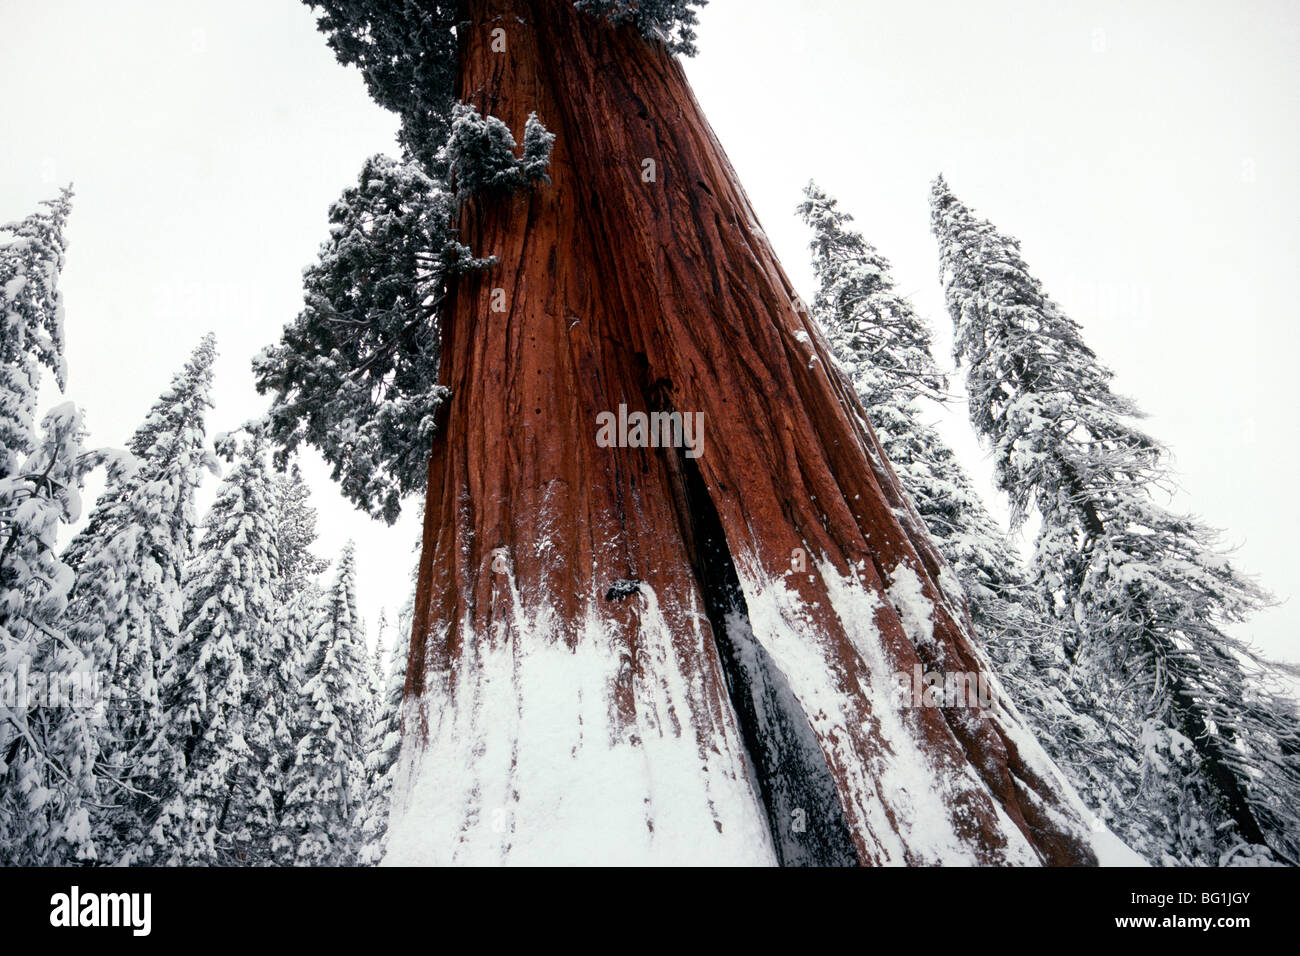 A giant sequoia tree in winter in Sequoia National Park in California. This national park was established in 1890 as the second U.S. national park after Yellowstone National Park Stock Photo